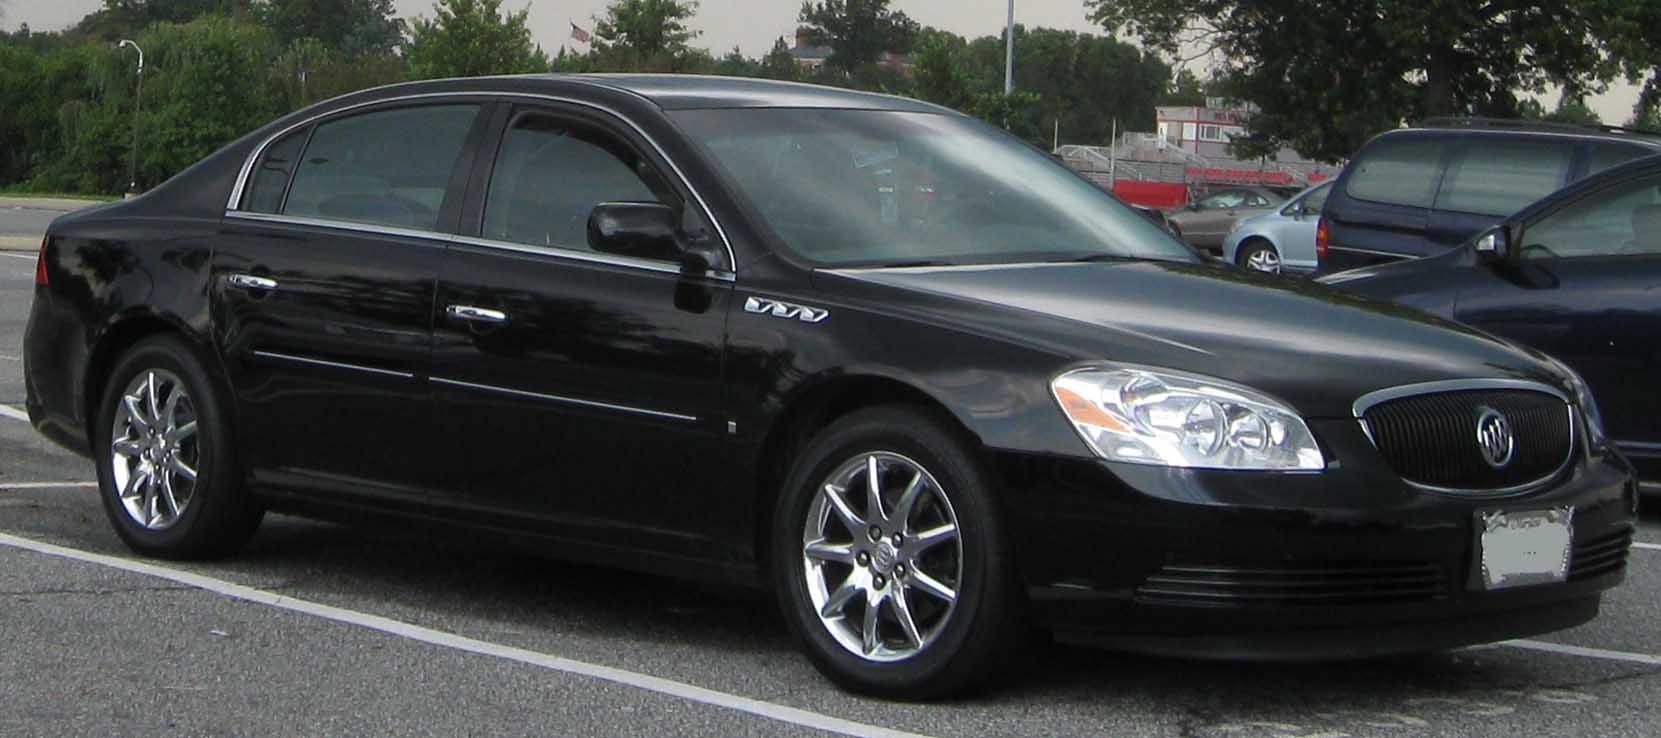 File:Buick Lucerne CXL.jpg - Wikimedia Commons